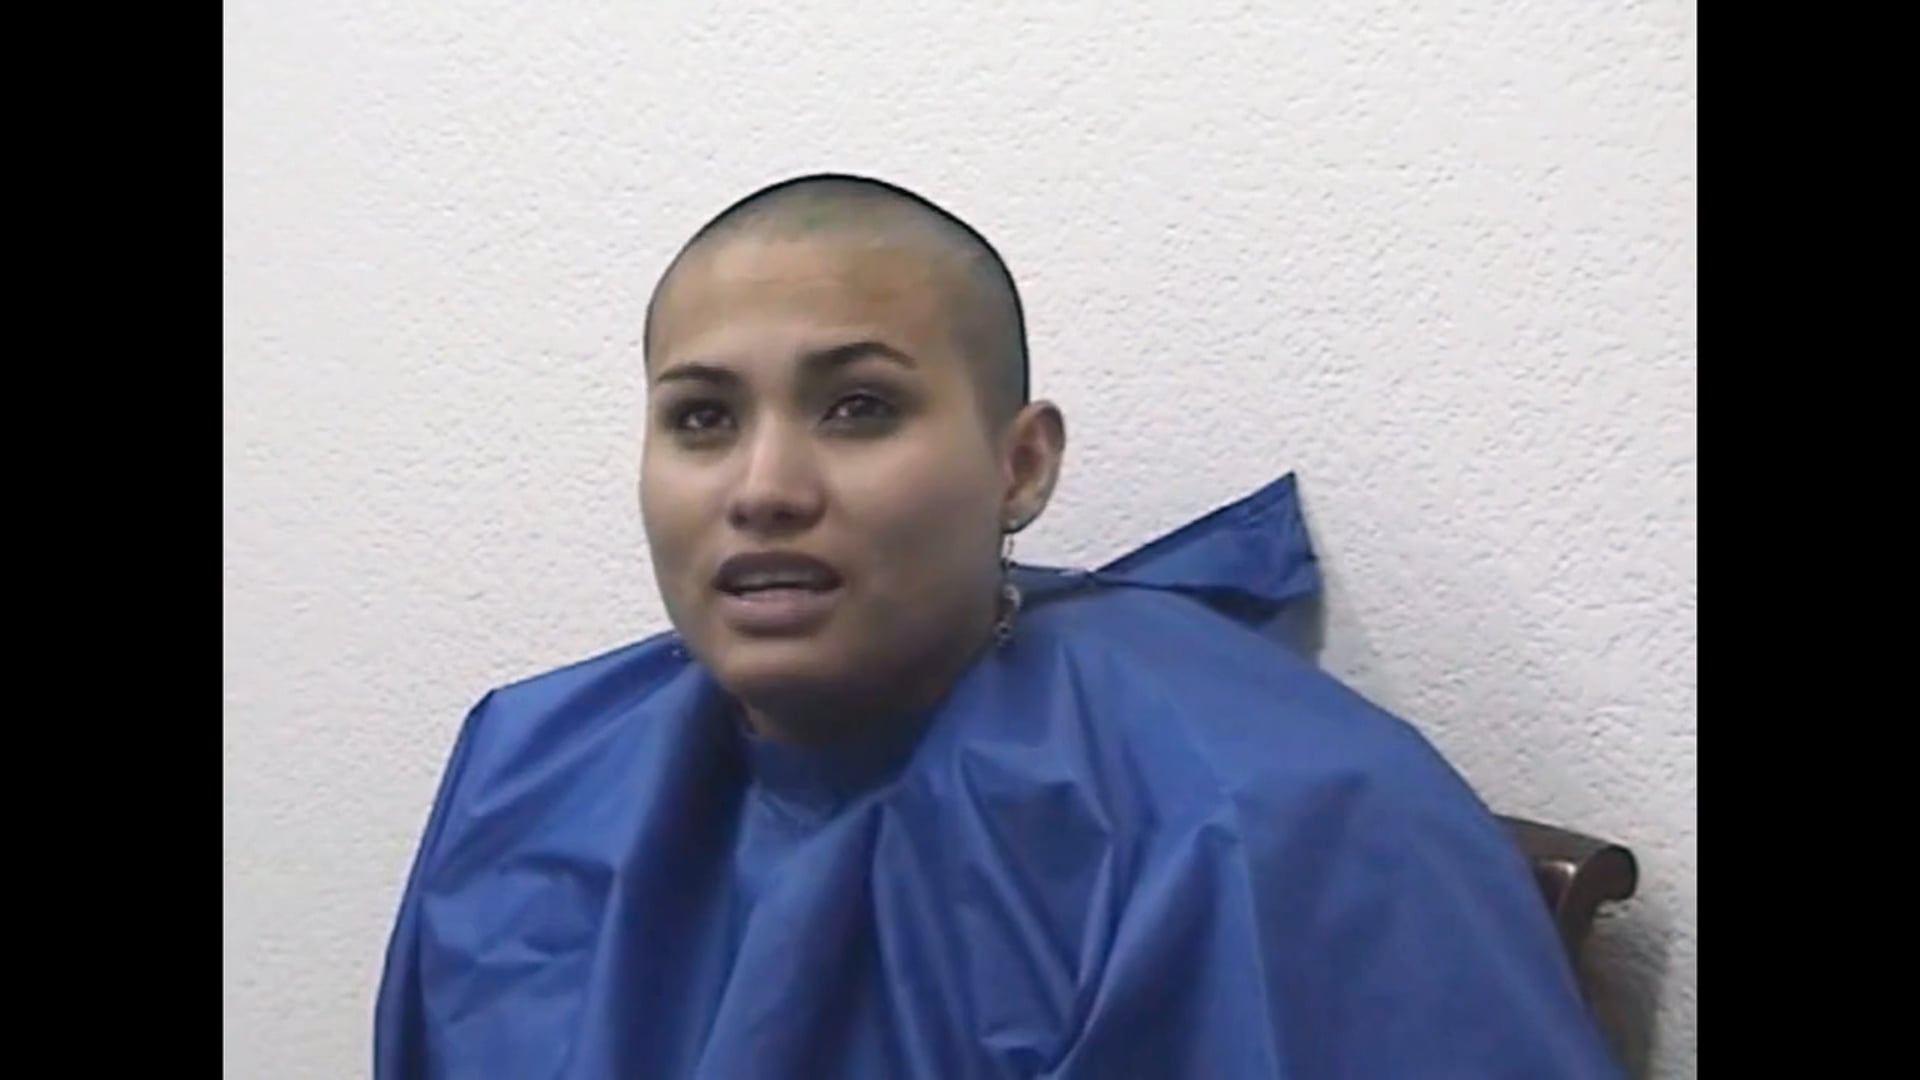 Ali shaves her head